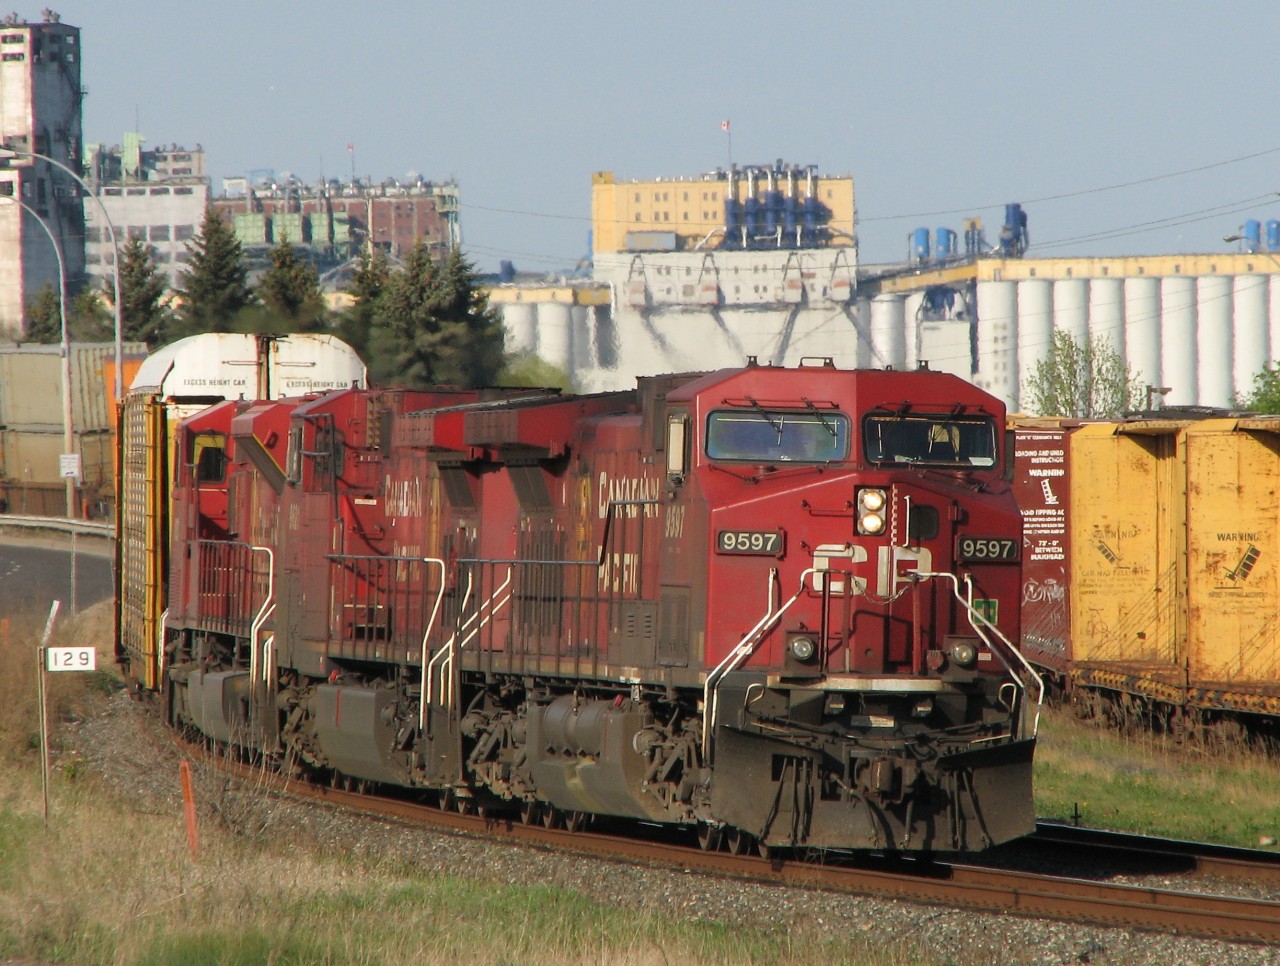 The stately grain elevators of JRI [James Richardson International] along the shore of Lake Superior on the 'Port Arthur' side of Thunder Bay provide the backdrop. A pair of AC4400CW's - cp9597 and cp9621 along with SD90MAC 9153 lead hotshot train CP#103. No remotes or distributed power back then! For the next mile the tracks are hemmed in by Fort William road on one side and CN's Thunder Bay North yard on the other.